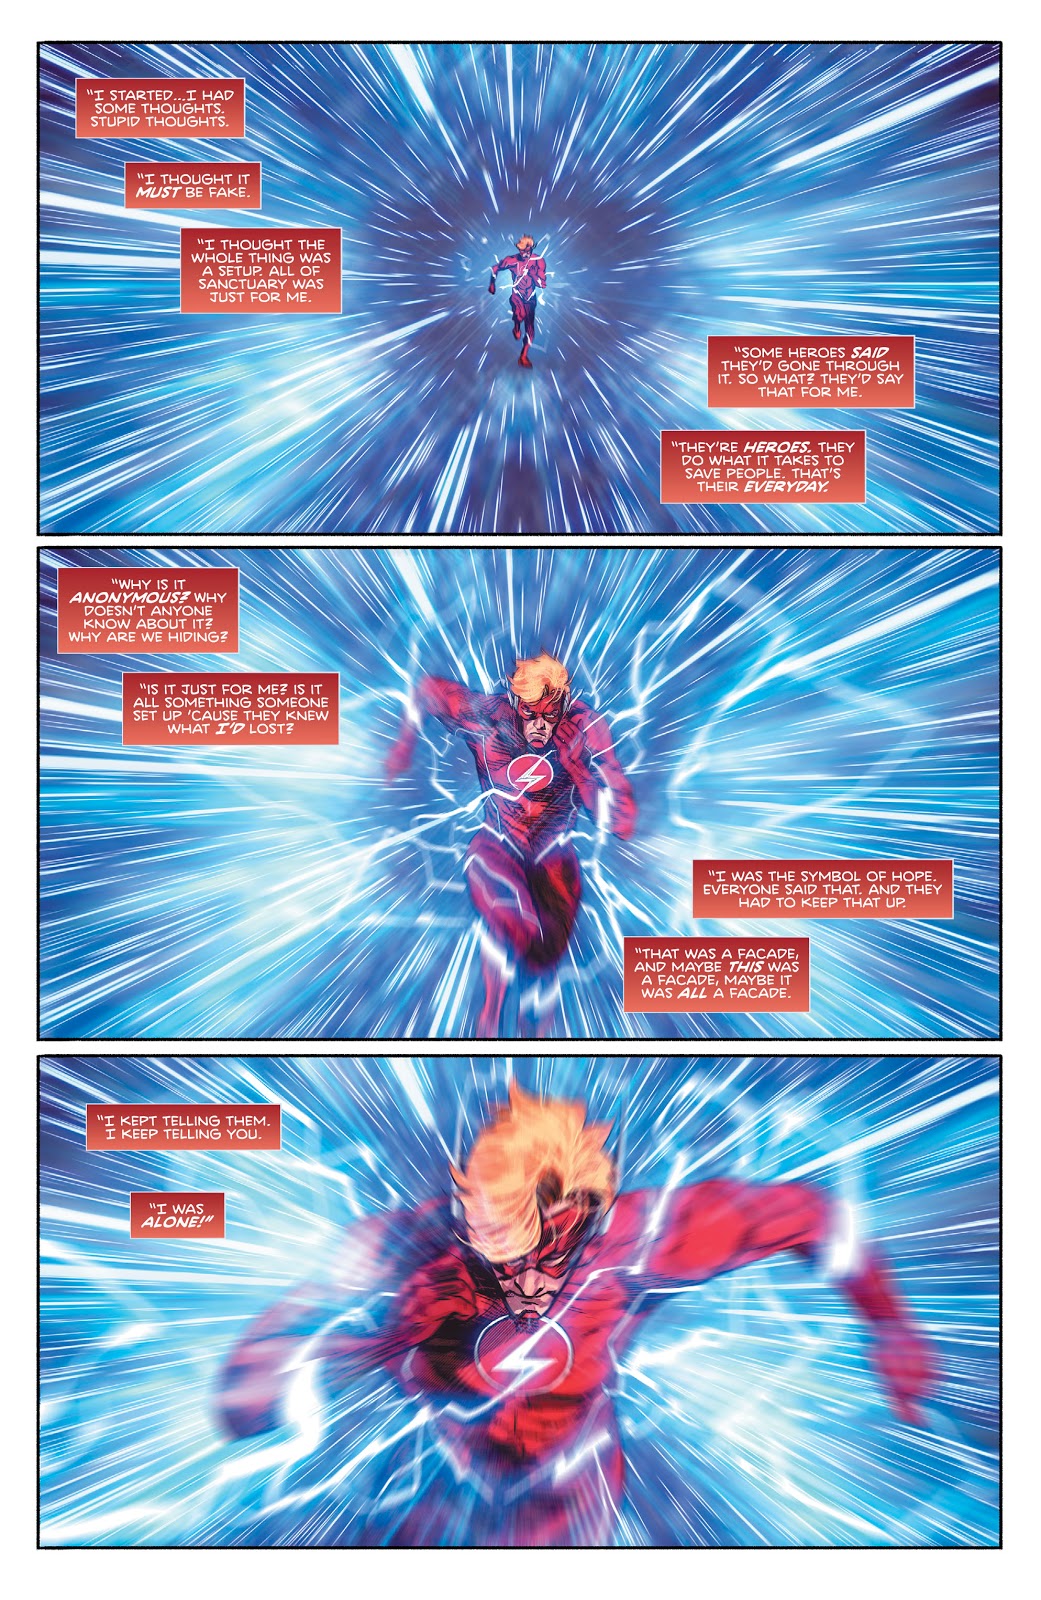 Wally West Kills Everyone in Sanctuary (Heroes In Crisis)